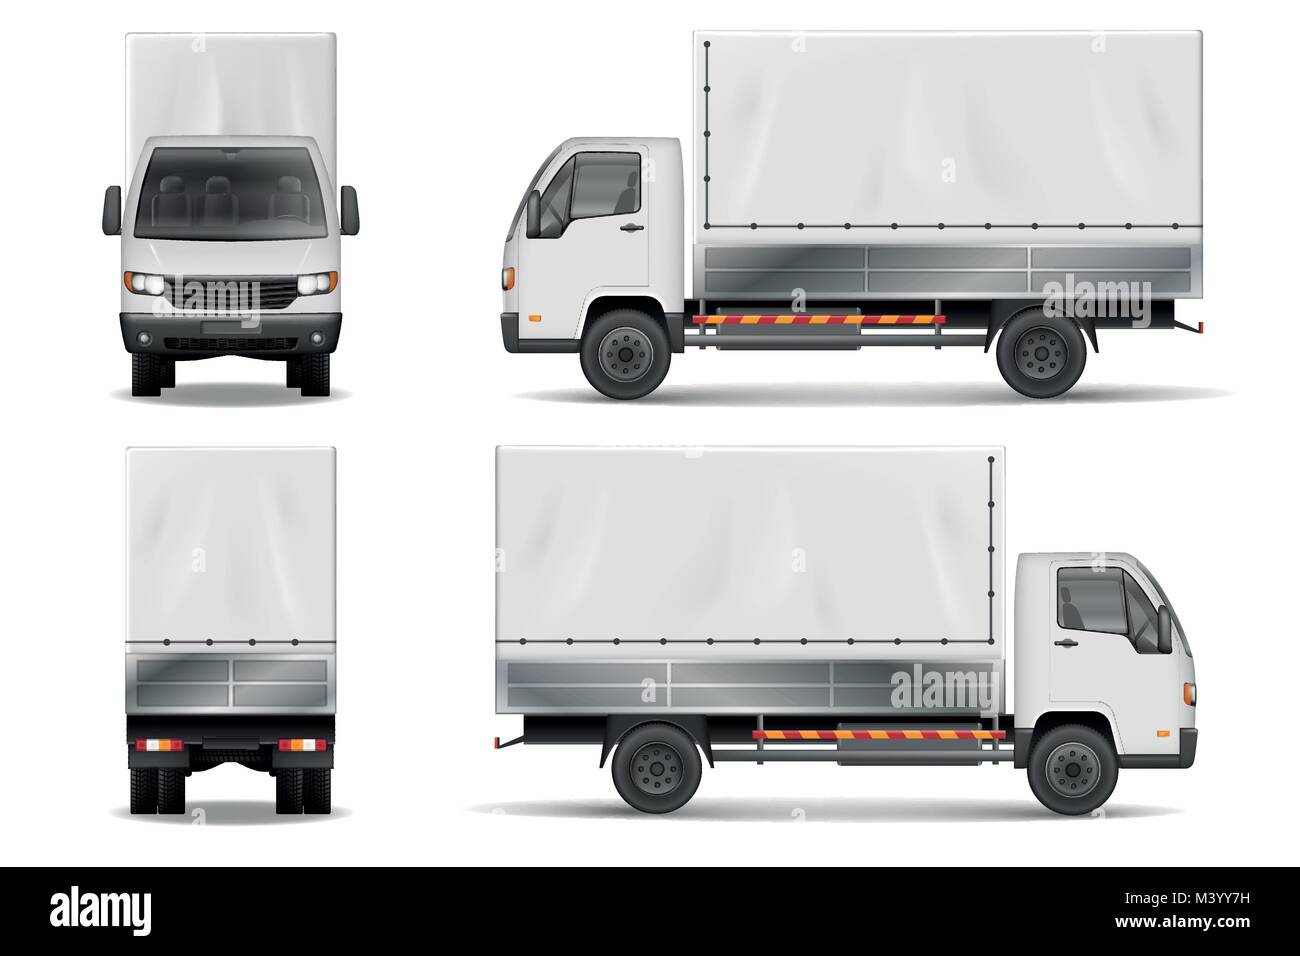 Semi truck isolated on white. Commercial realistic cargo lorry mockup. Delivery truck vector template from side, back, front View. Stock Vector